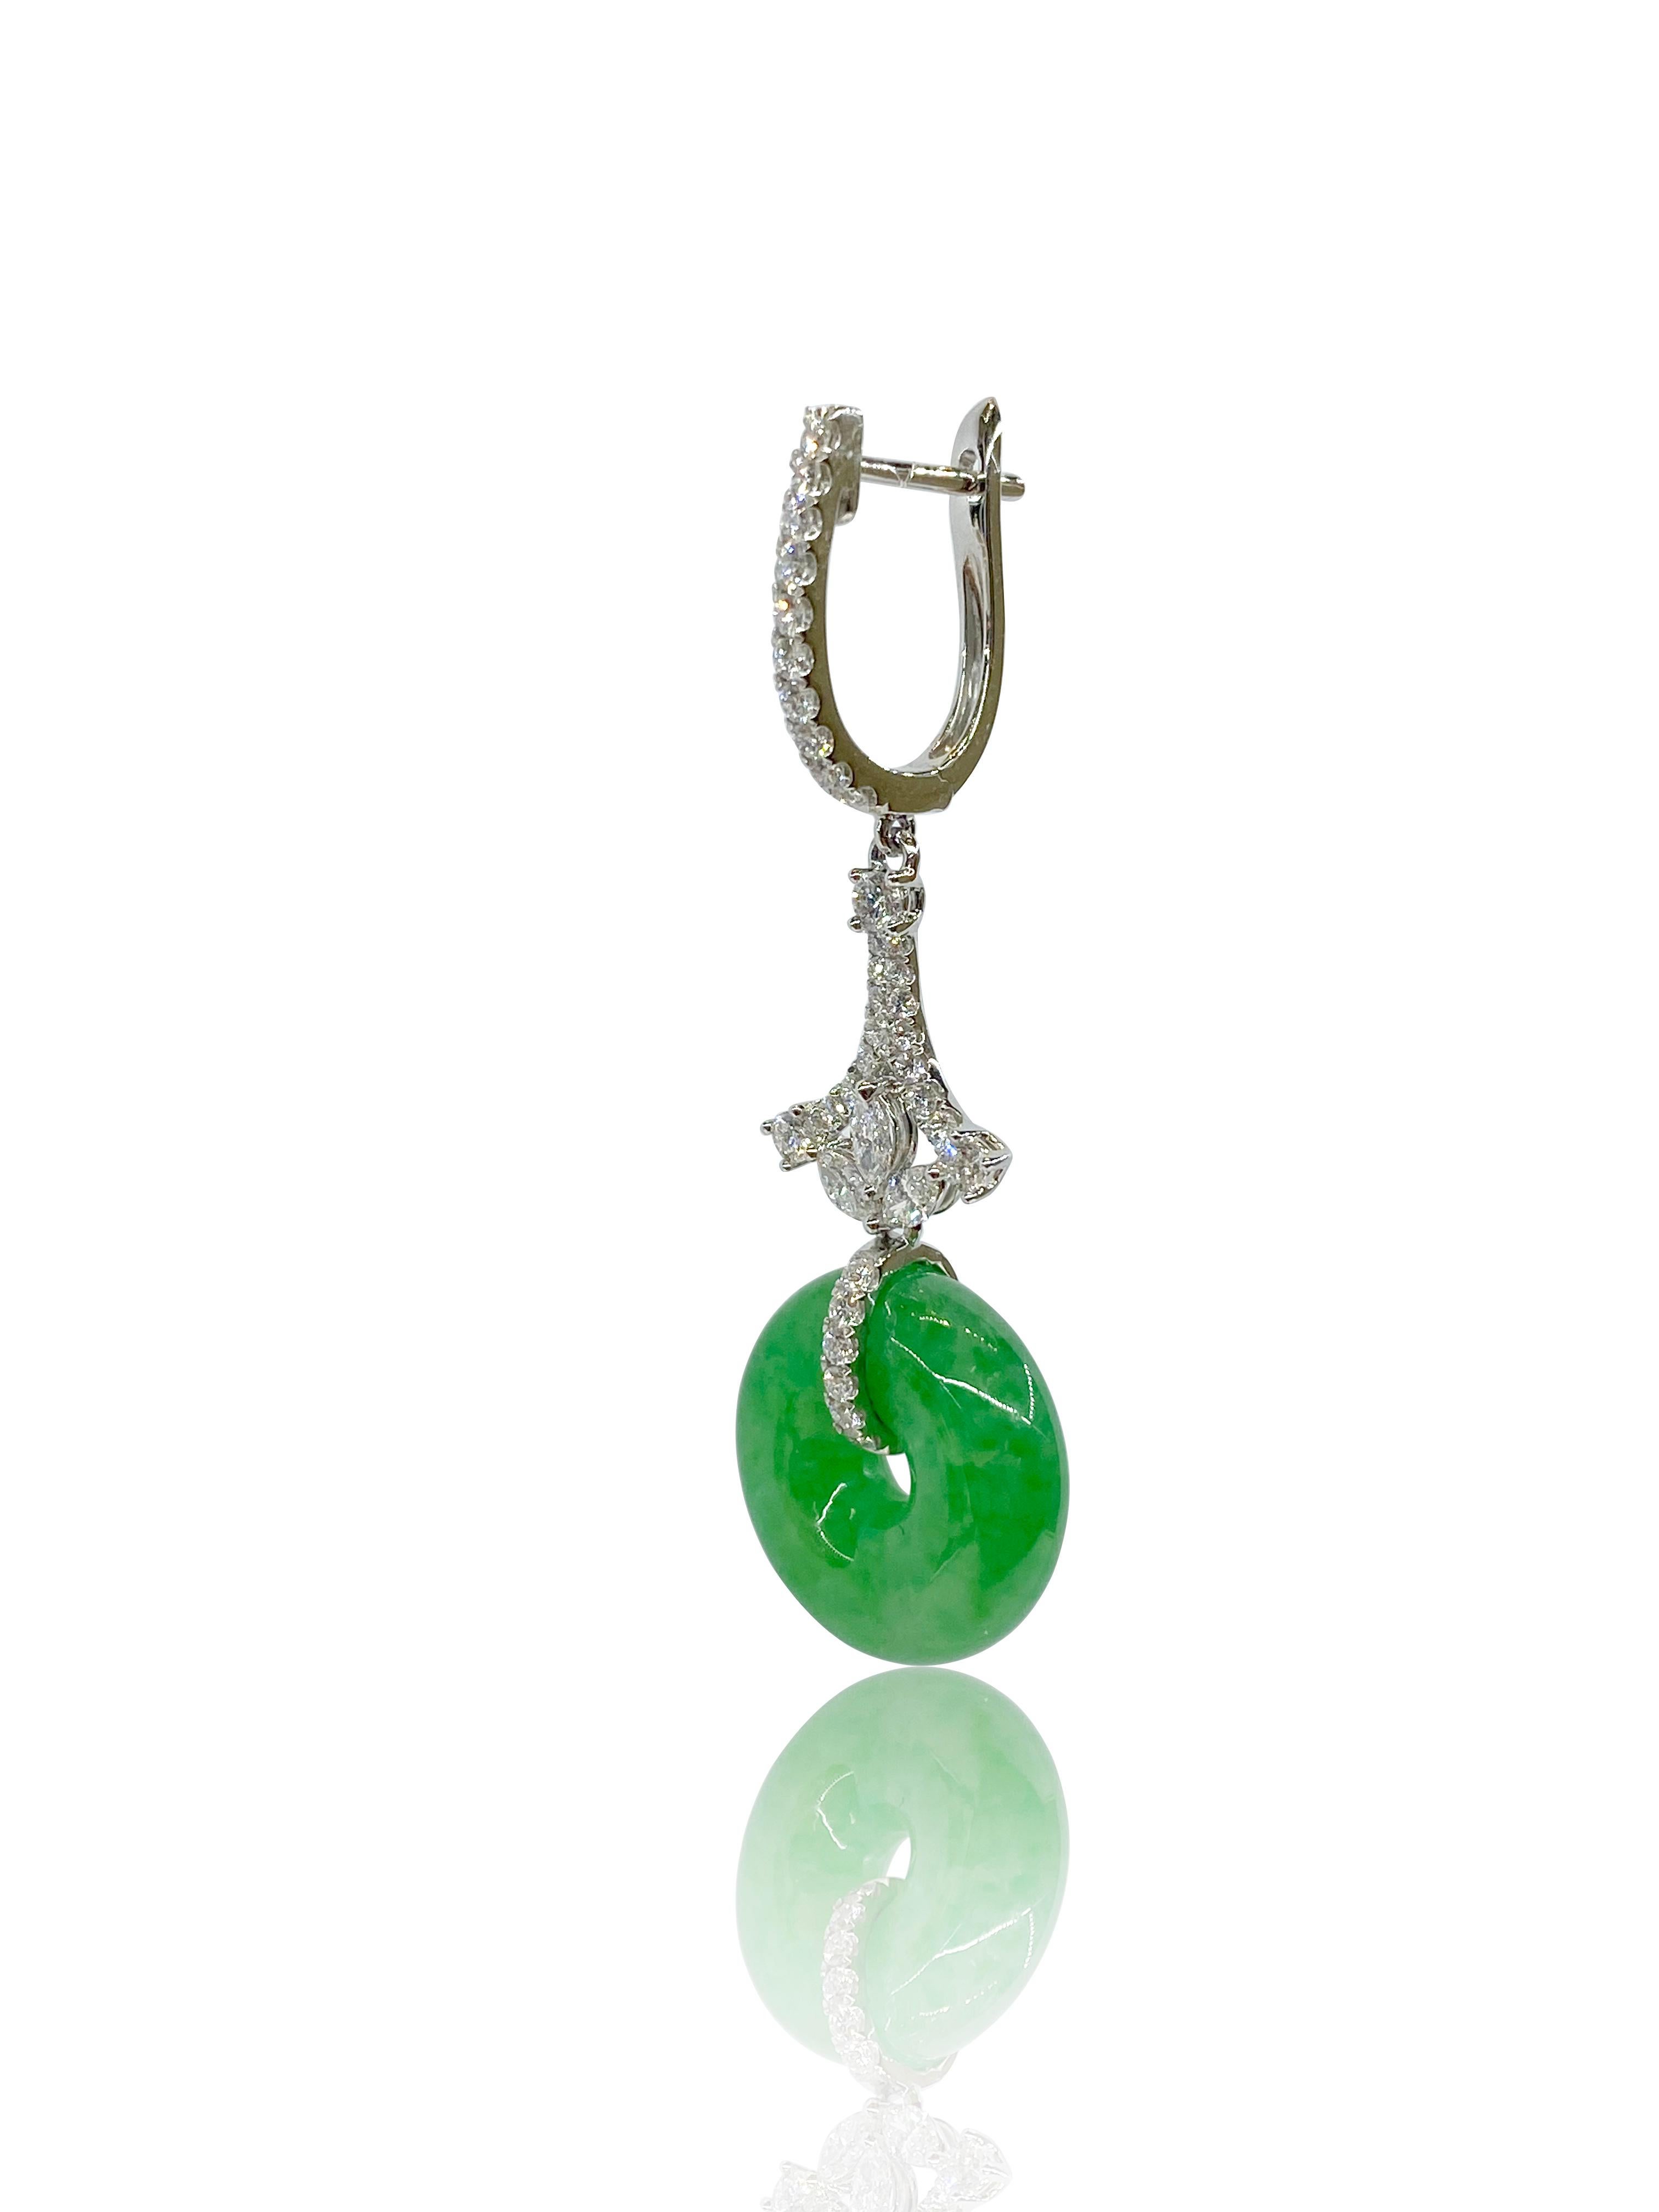 Contemporary A Pair of Imperial Jadeite and Diamond Earrings in 18 Karat White Gold For Sale